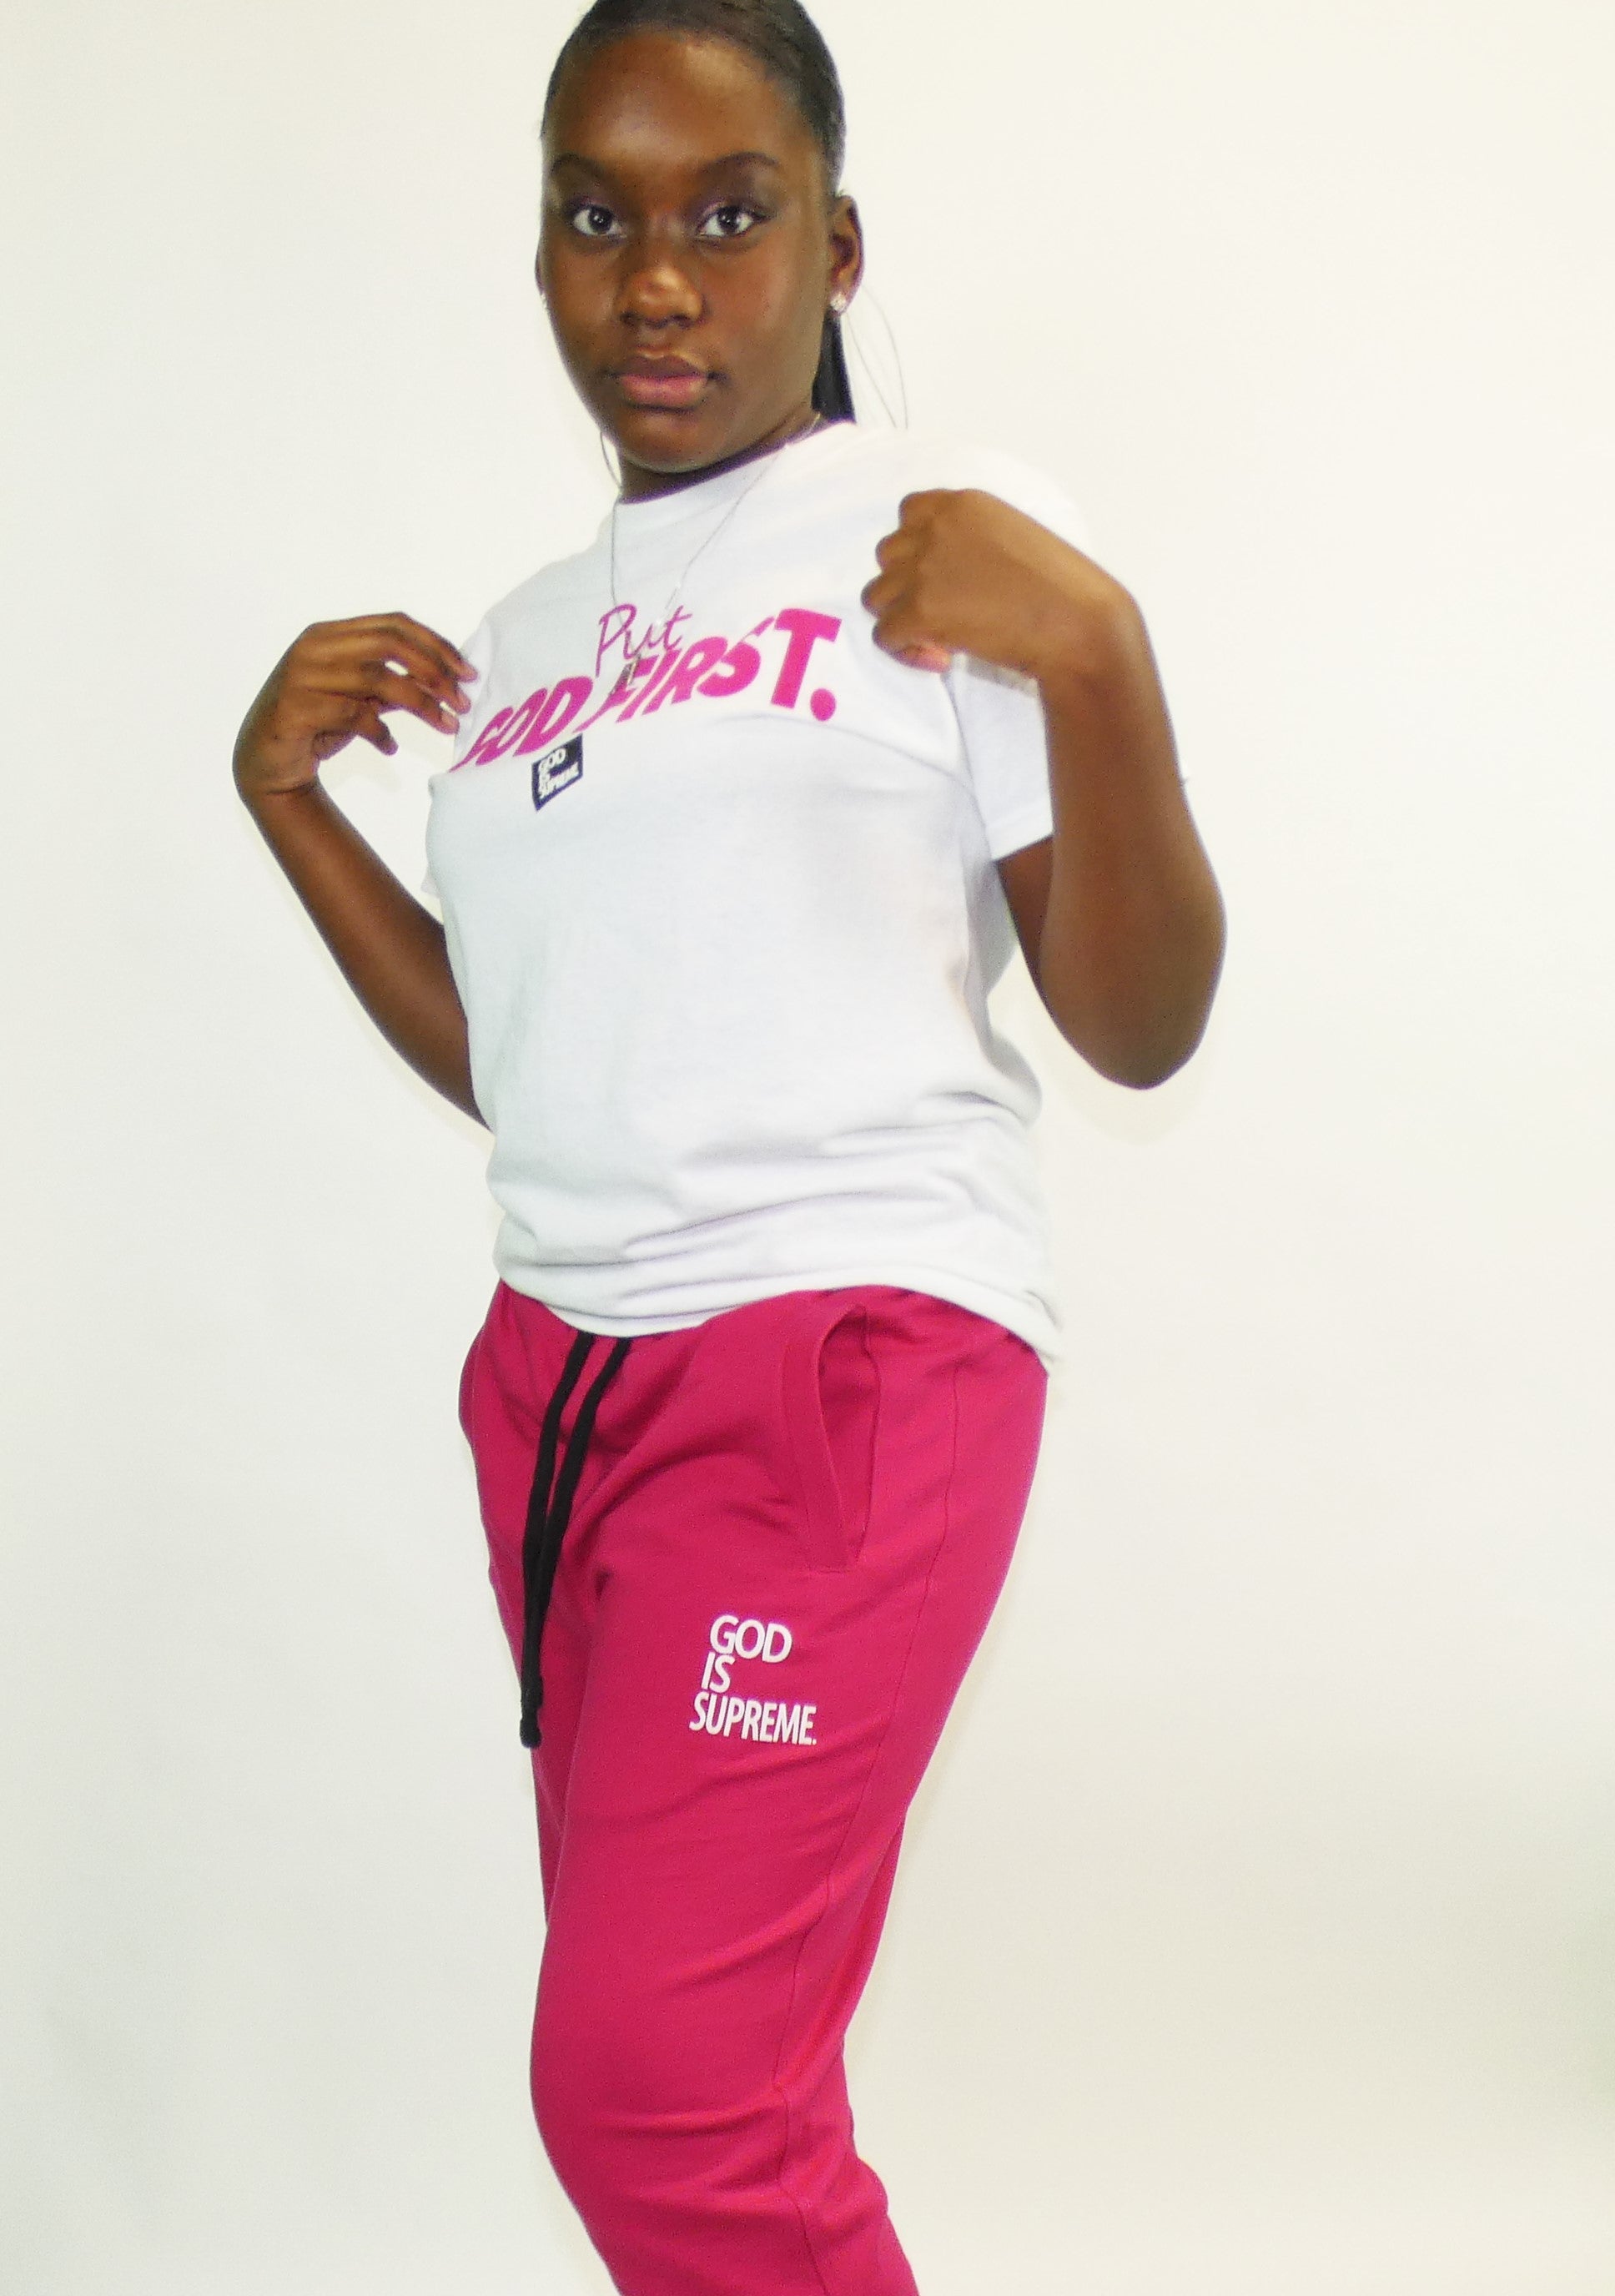 Put God First with Box (Pink) / White T-shirt